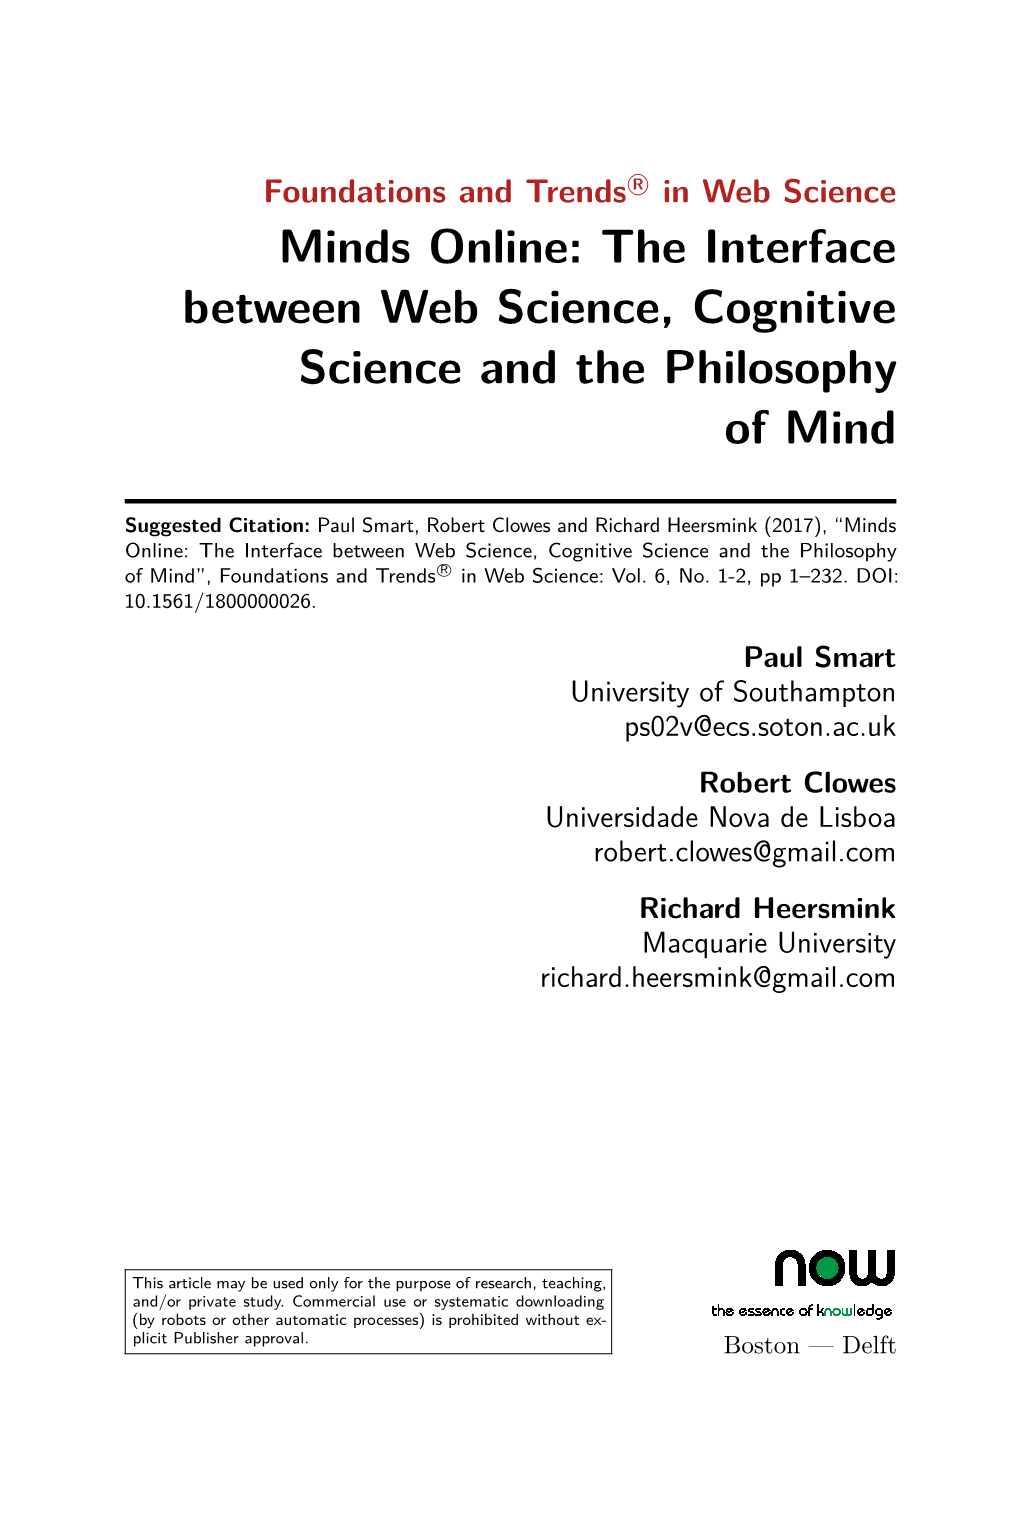 Minds Online: the Interface Between Web Science, Cognitive Science and the Philosophy of Mind